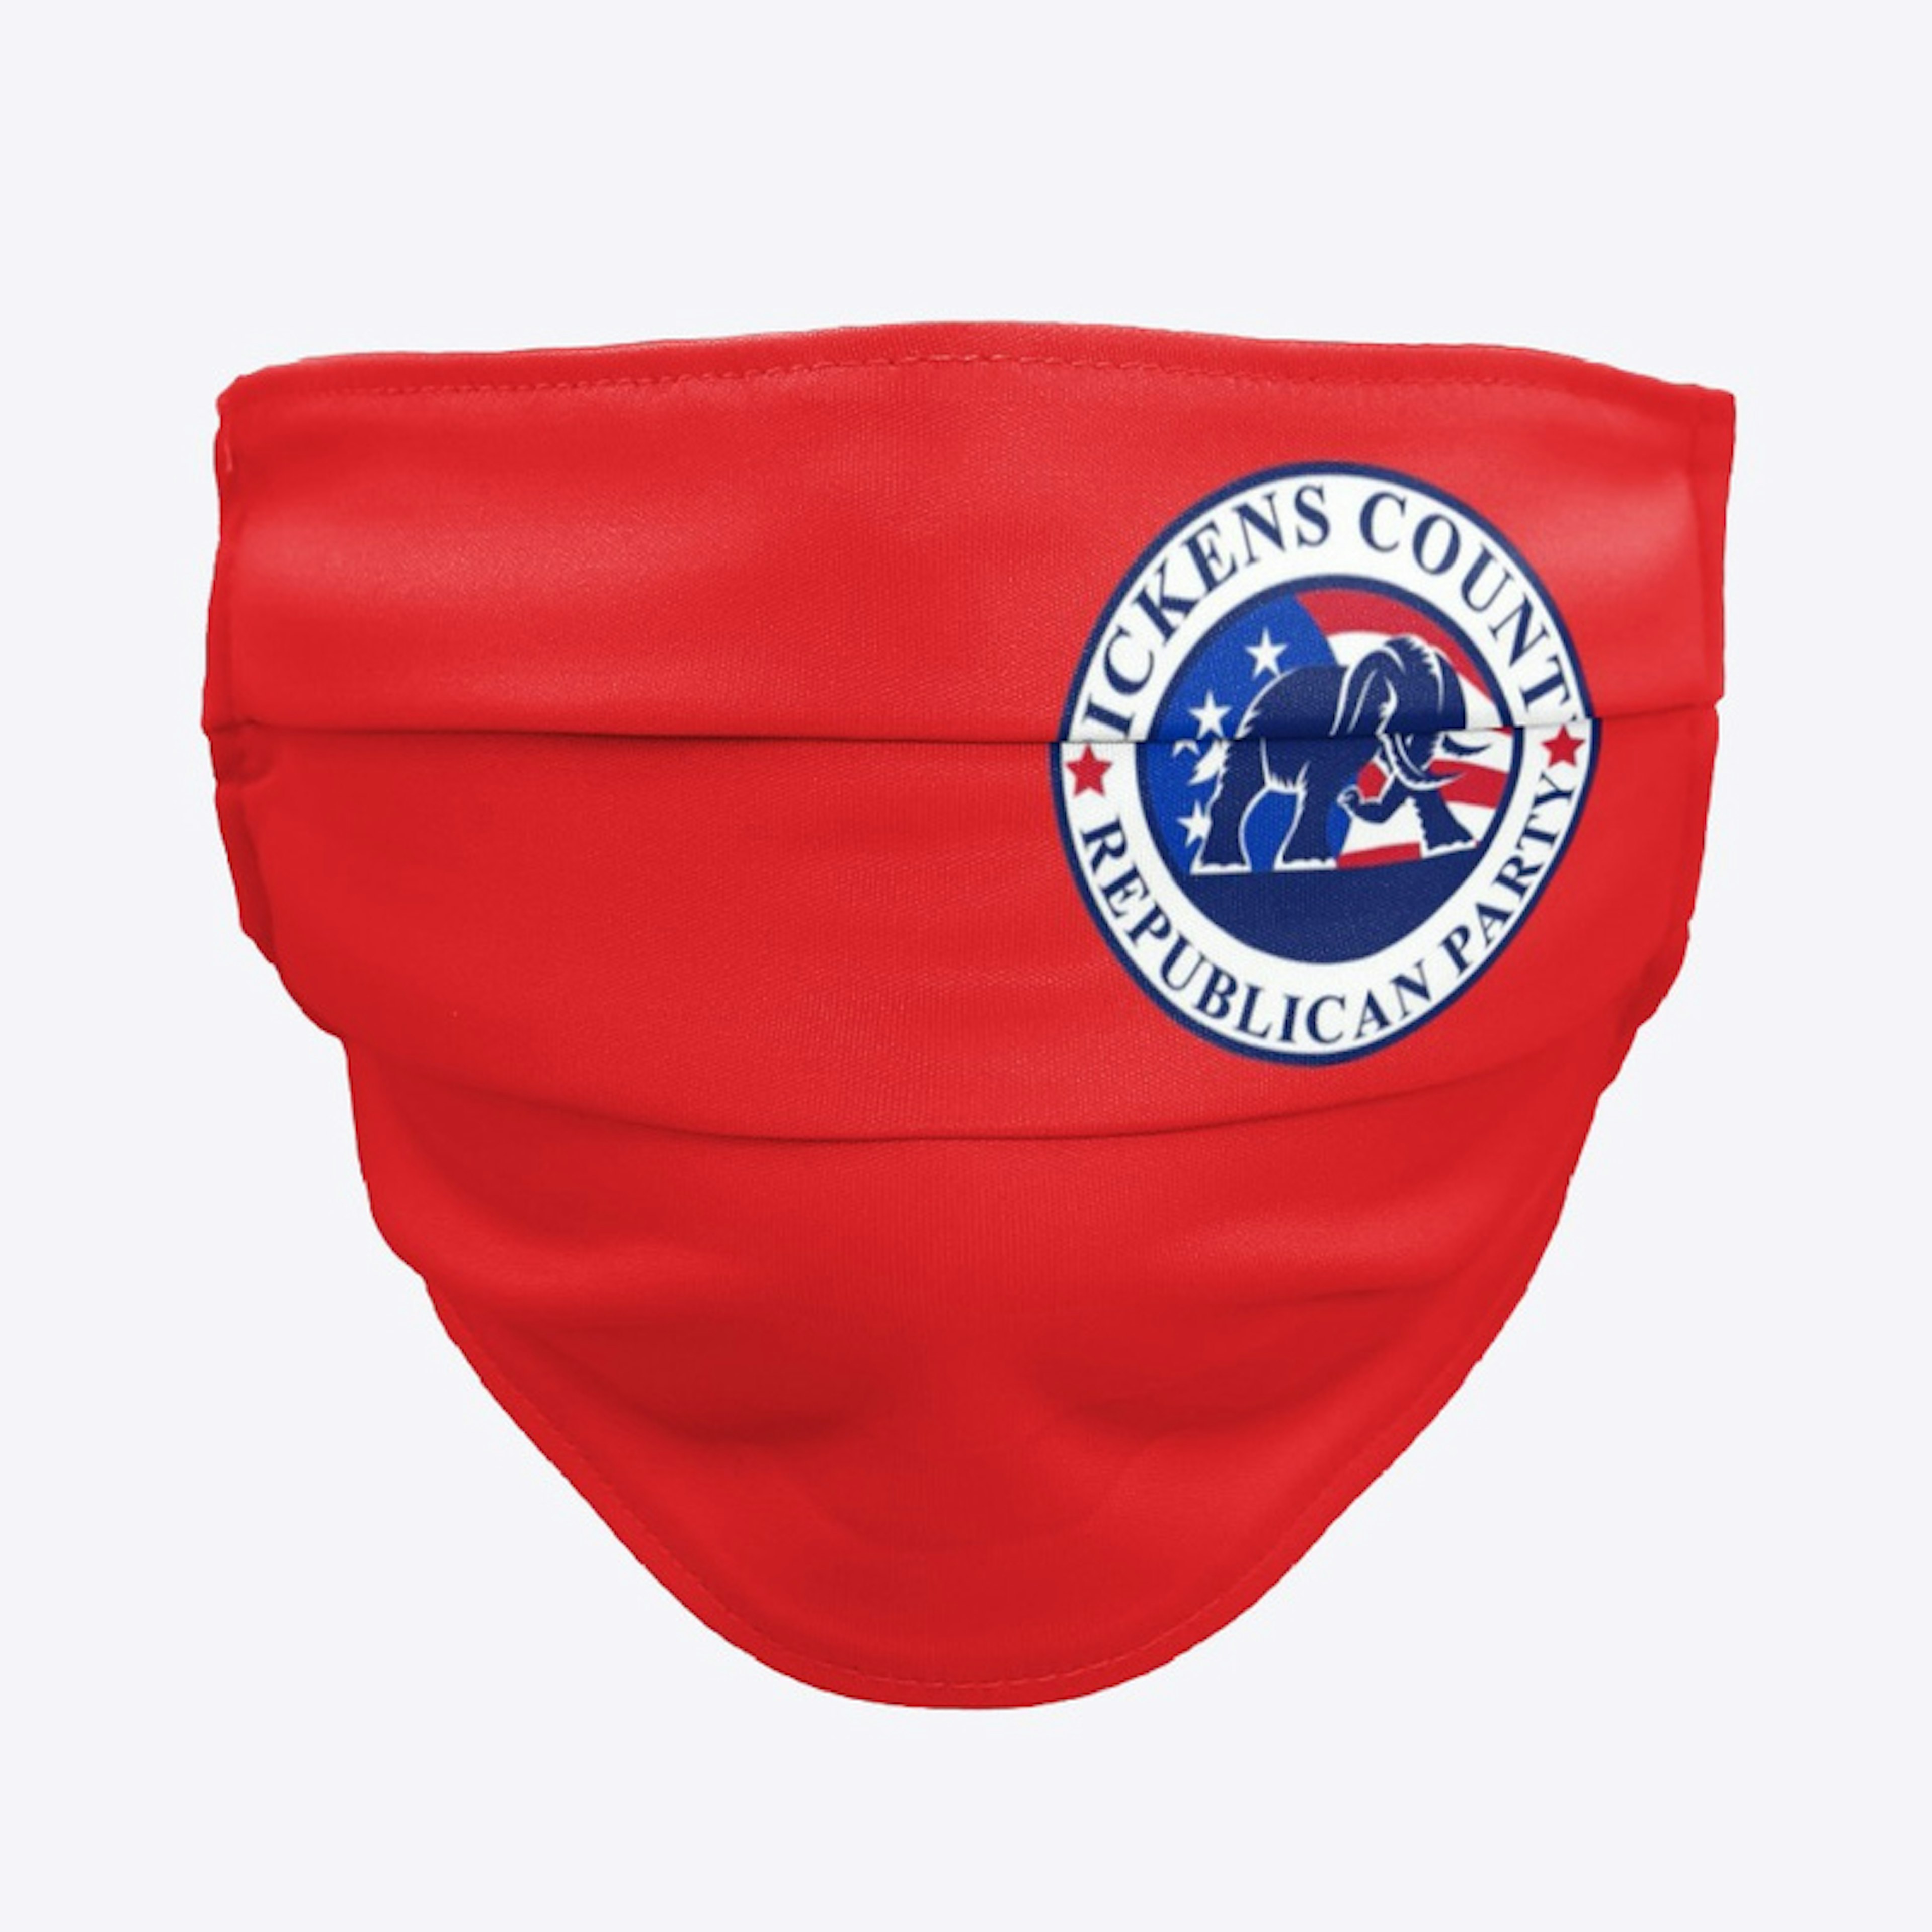 Pickens County GOP Cloth Face Mask